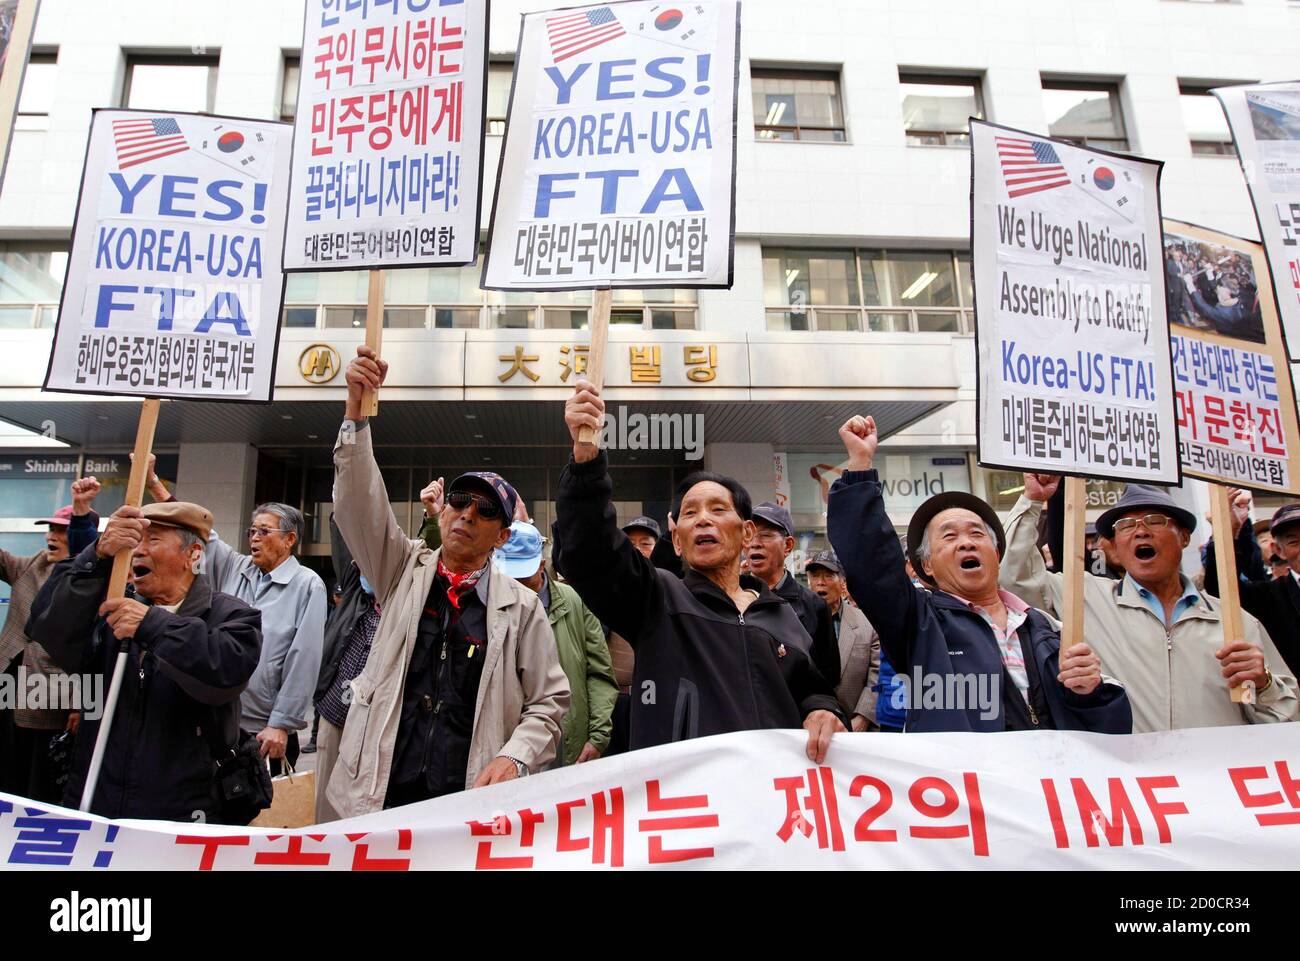 Conservative protesters shout slogans during a rally supporting the South Korea-U.S. free trade agreement (FTA) talks near the National Assembly in Seoul November 1, 2011.   REUTERS/Jo Yong-Hak (SOUTH KOREA - Tags: POLITICS CIVIL UNREST BUSINESS) Stock Photo